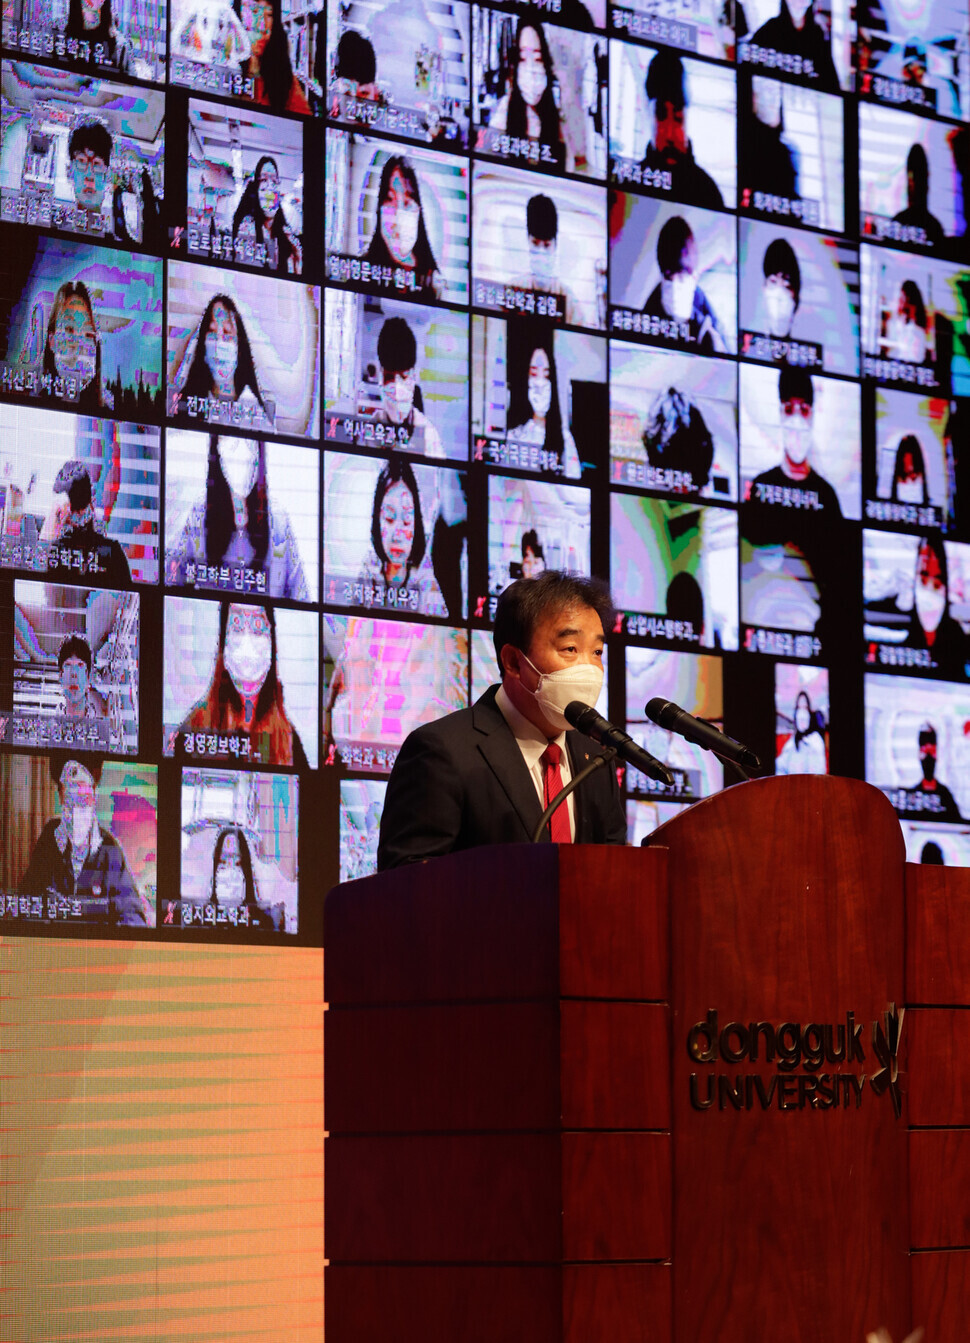 Dongguk University President Yoon Sung-yee speaks to students who attended the ceremony on Feb. 22. (Kim Hye-yun)